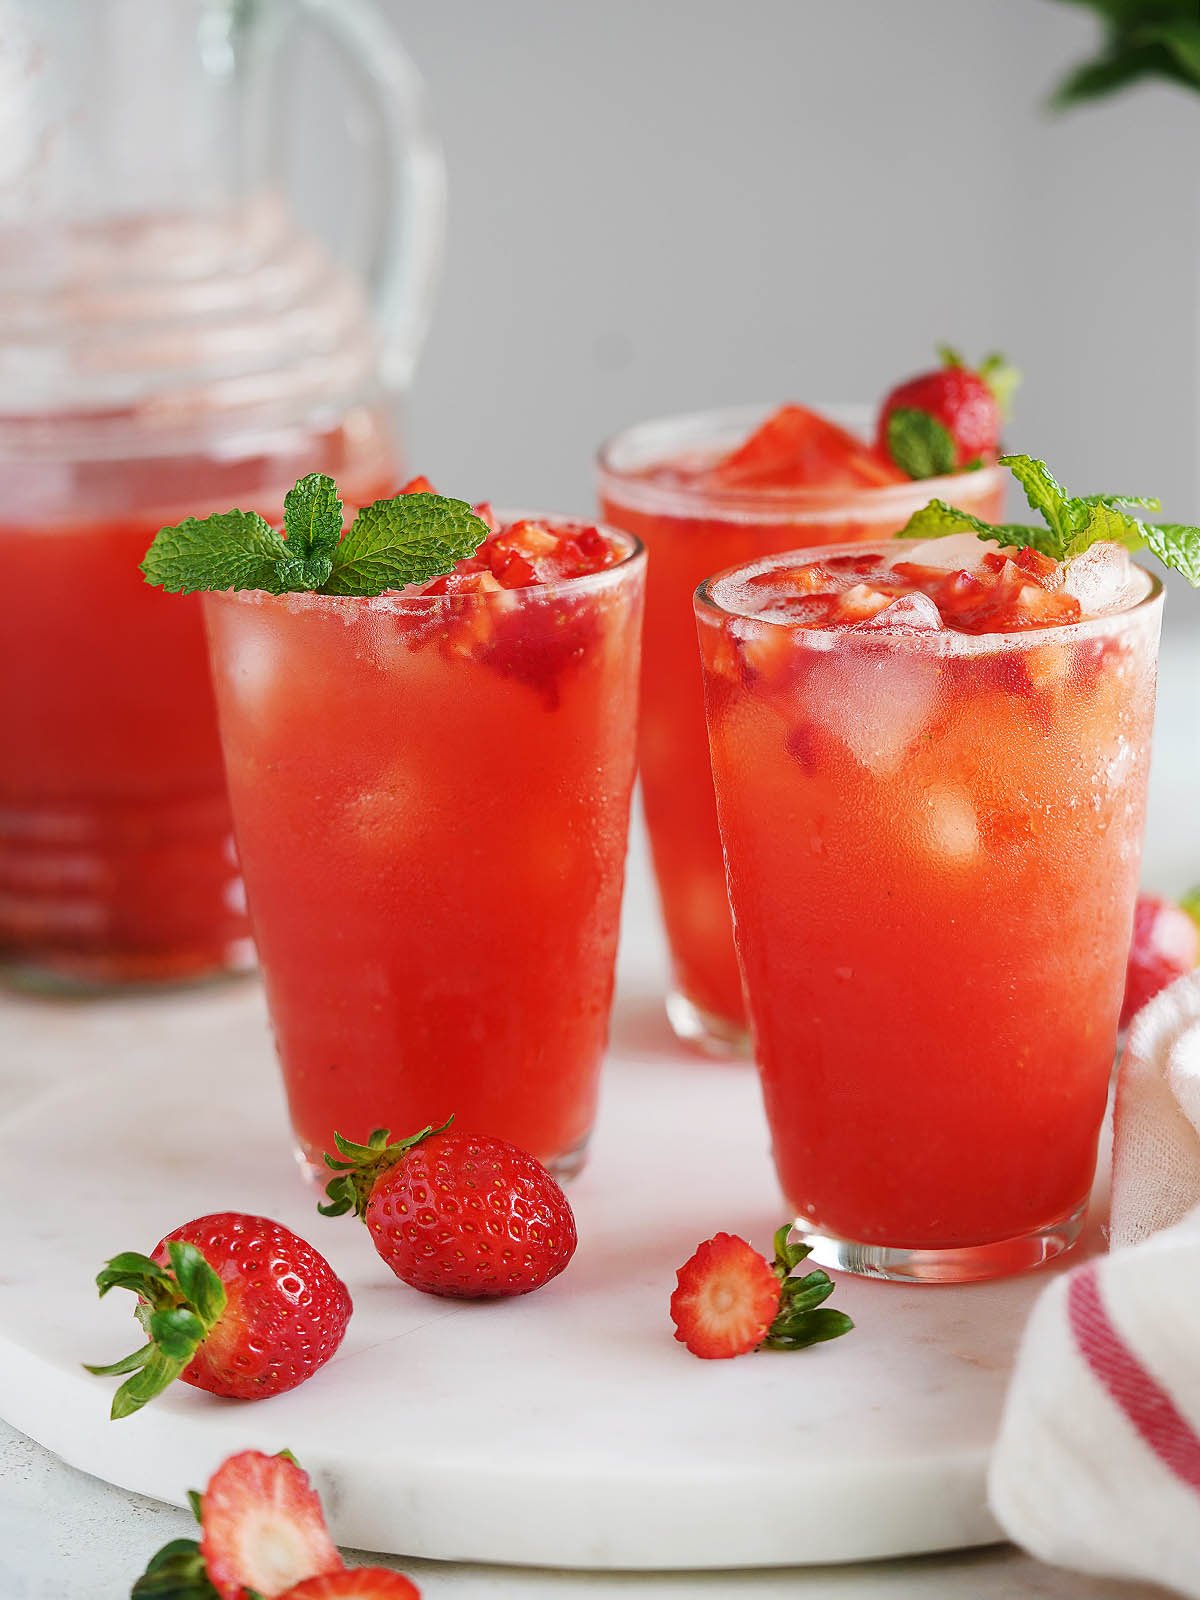 Three glasses with ice and strawberry water topped with small chunks of strawberries and the jar in the background.